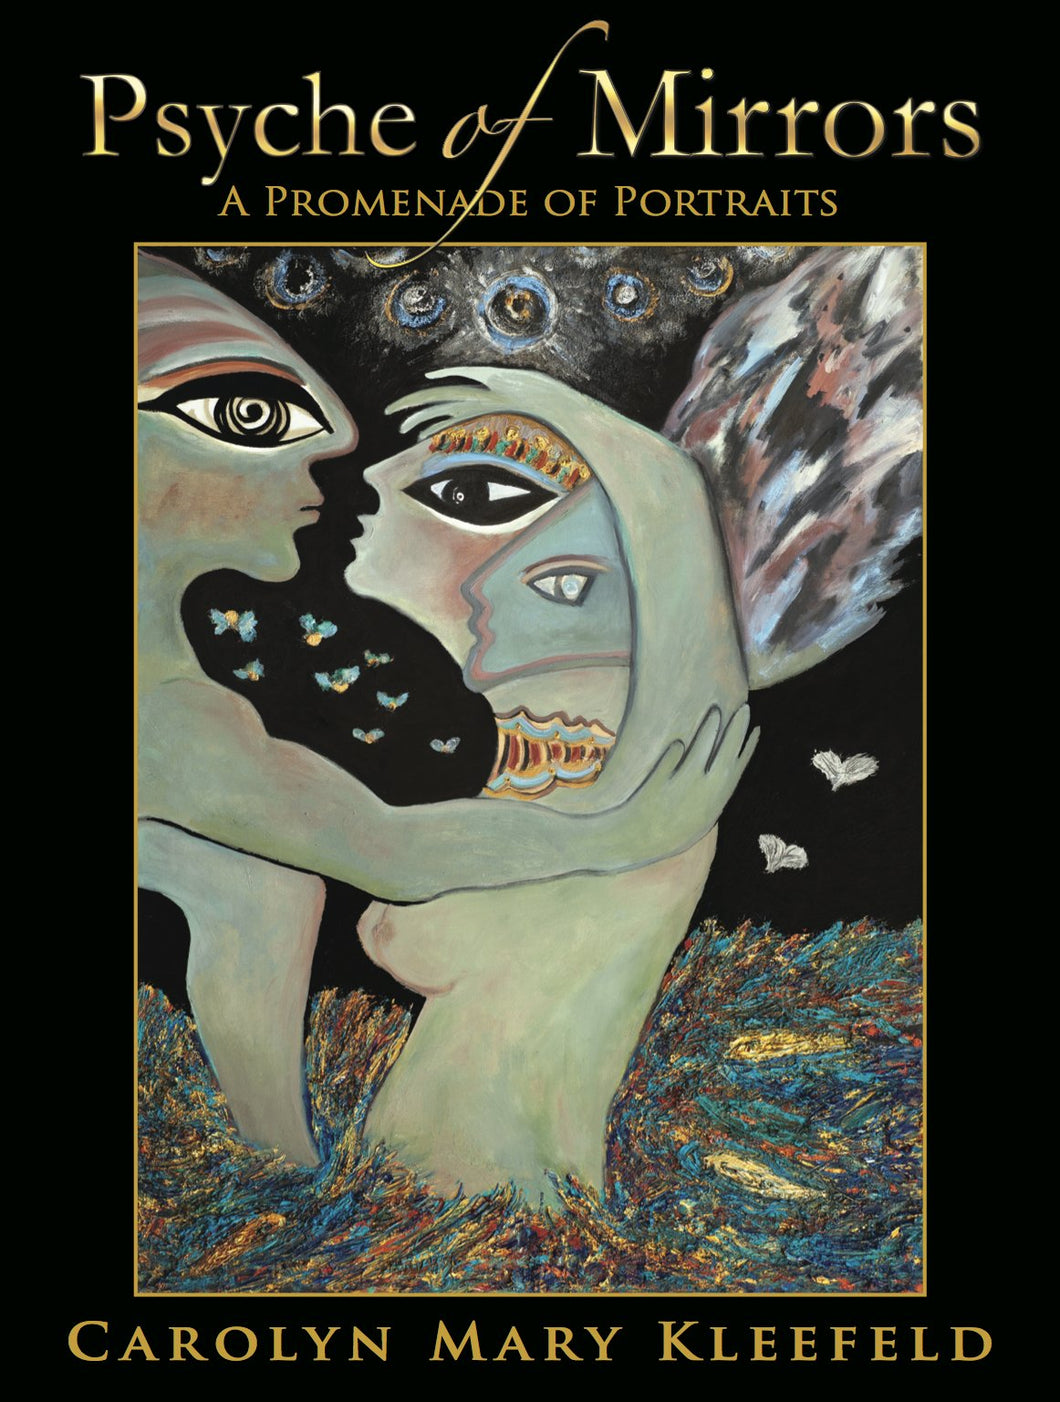 PSYCHE OF MIRRORS/A PROMENADE OF PORTRAITS by American poet and artist Carolyn Mary Kleefeld, 2012